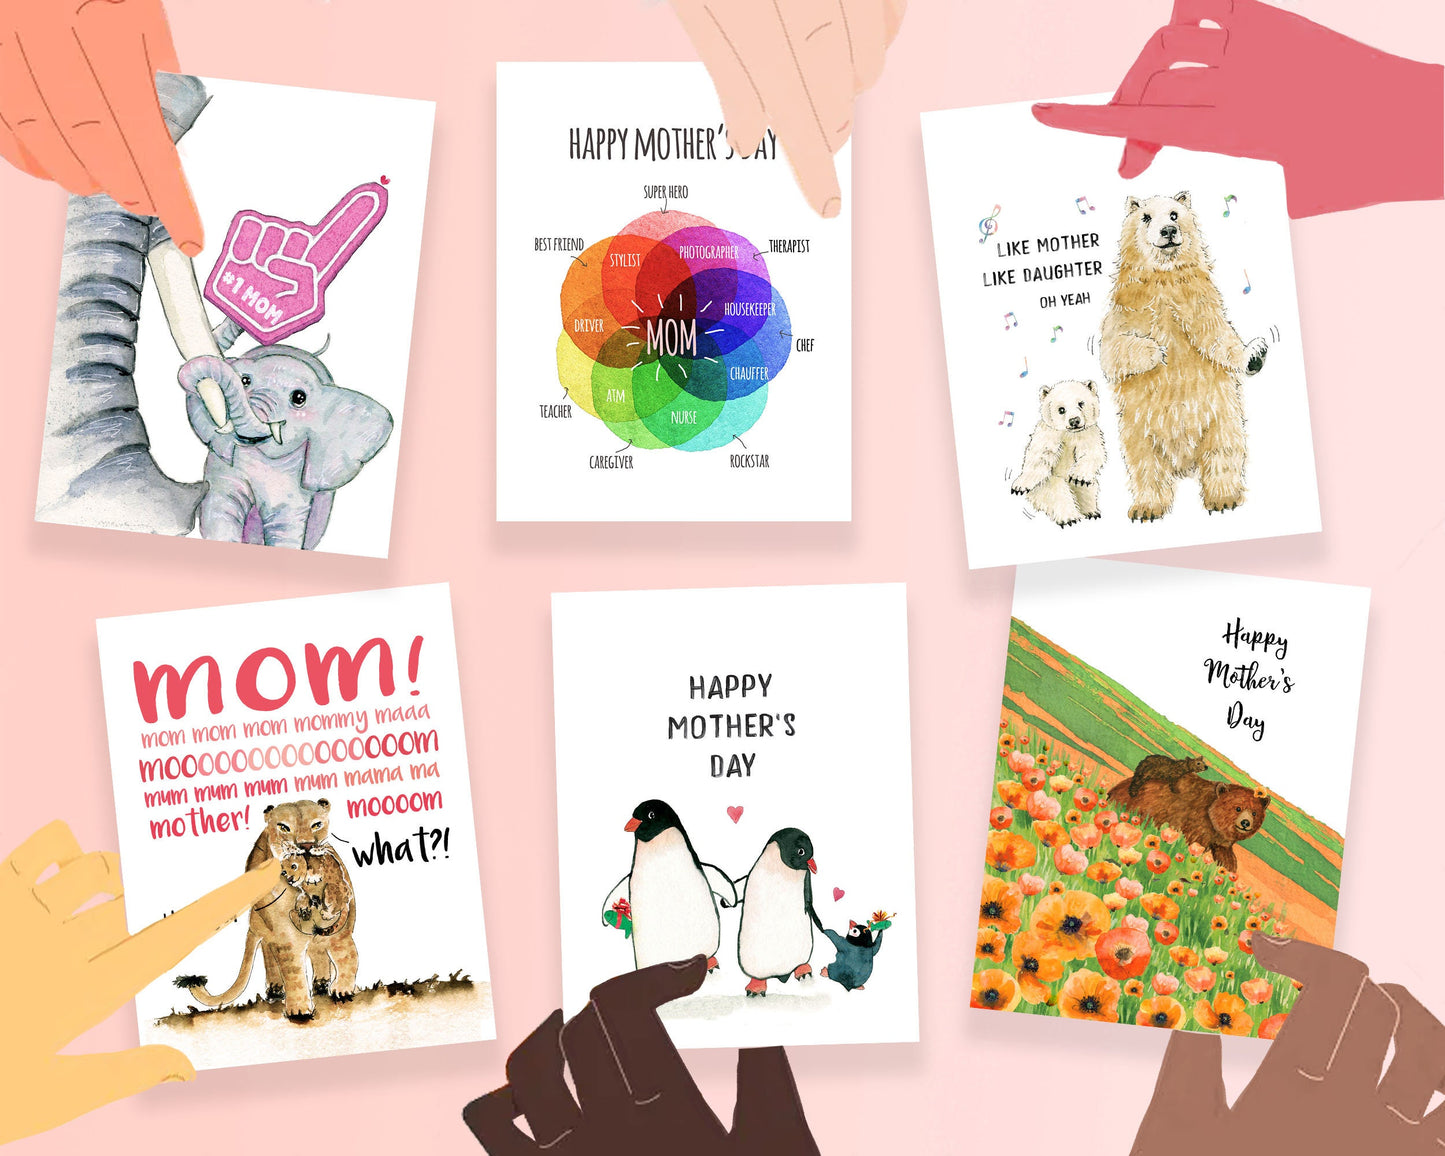 Funny Lion Mom Card, I Love You Mum, Funny Mom Card From Baby Lions, Funny Mother's Day Card, Mom Birthday Card, Mom Love You Card For Wife